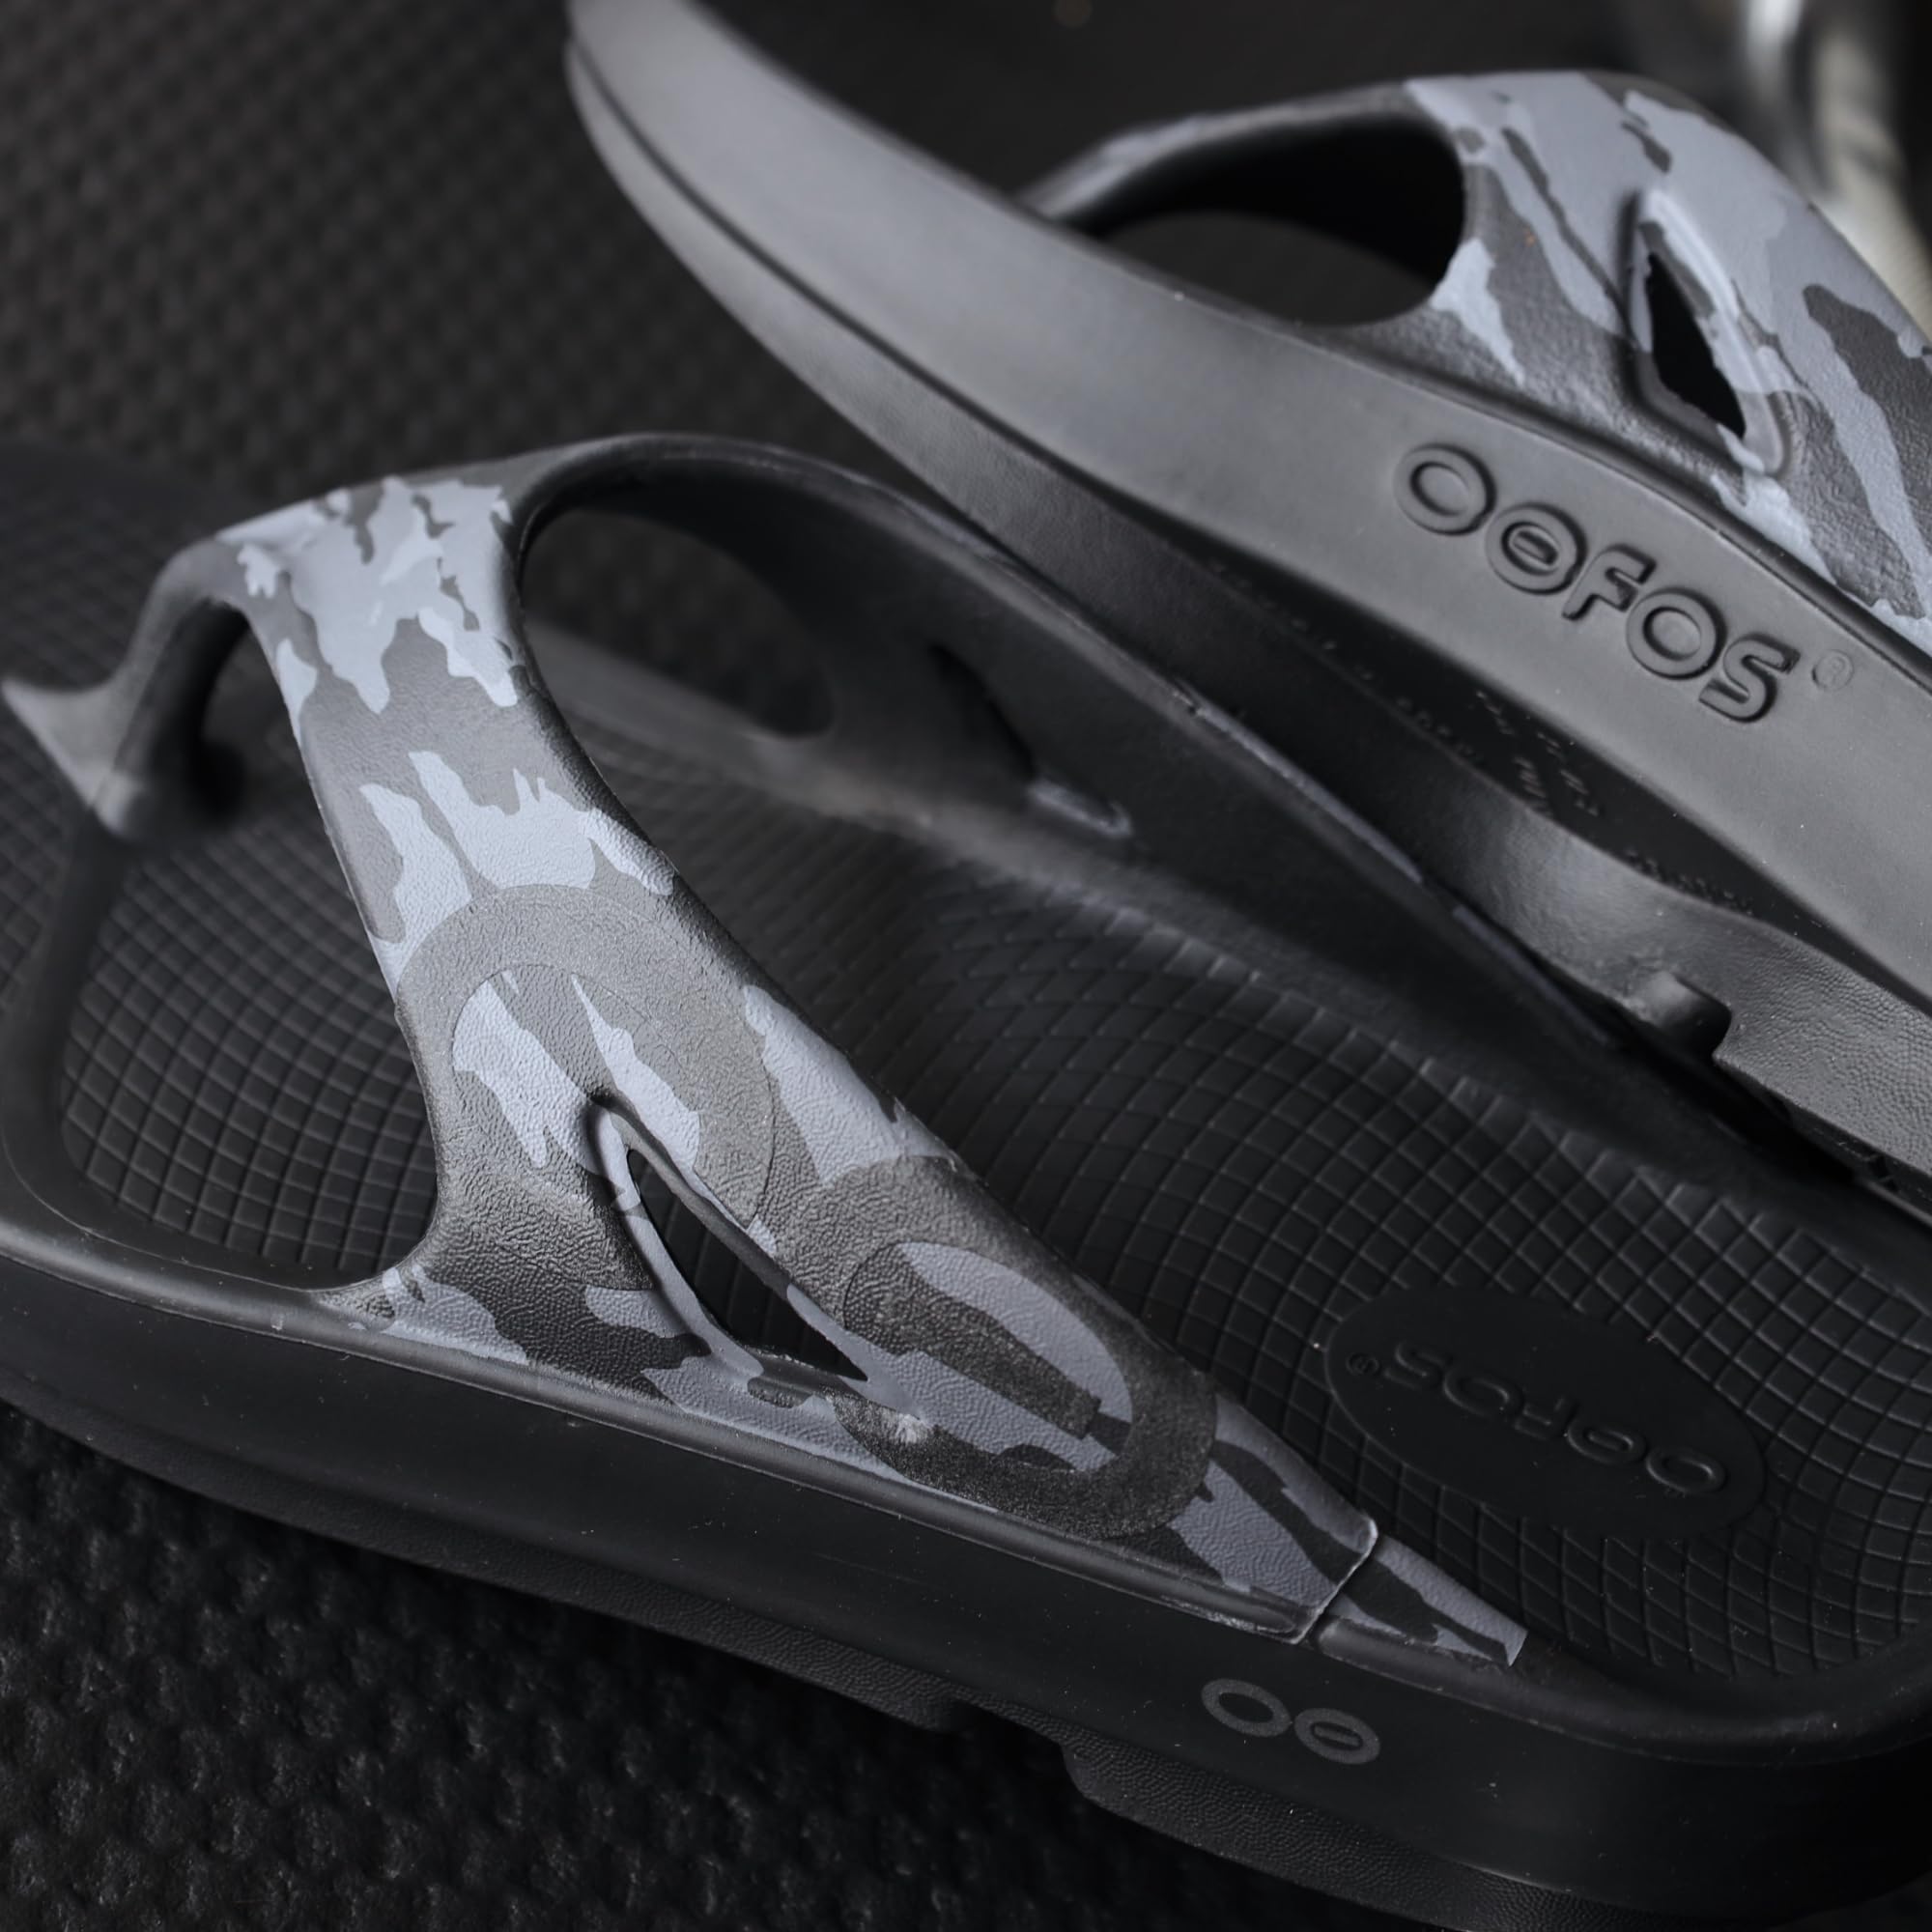 OOFOS OOriginal Sport Sandal - Lightweight Recovery Footwear - Reduces Stress on Feet, Joints & Back - Machine Washable - Hand-Painted Graphics